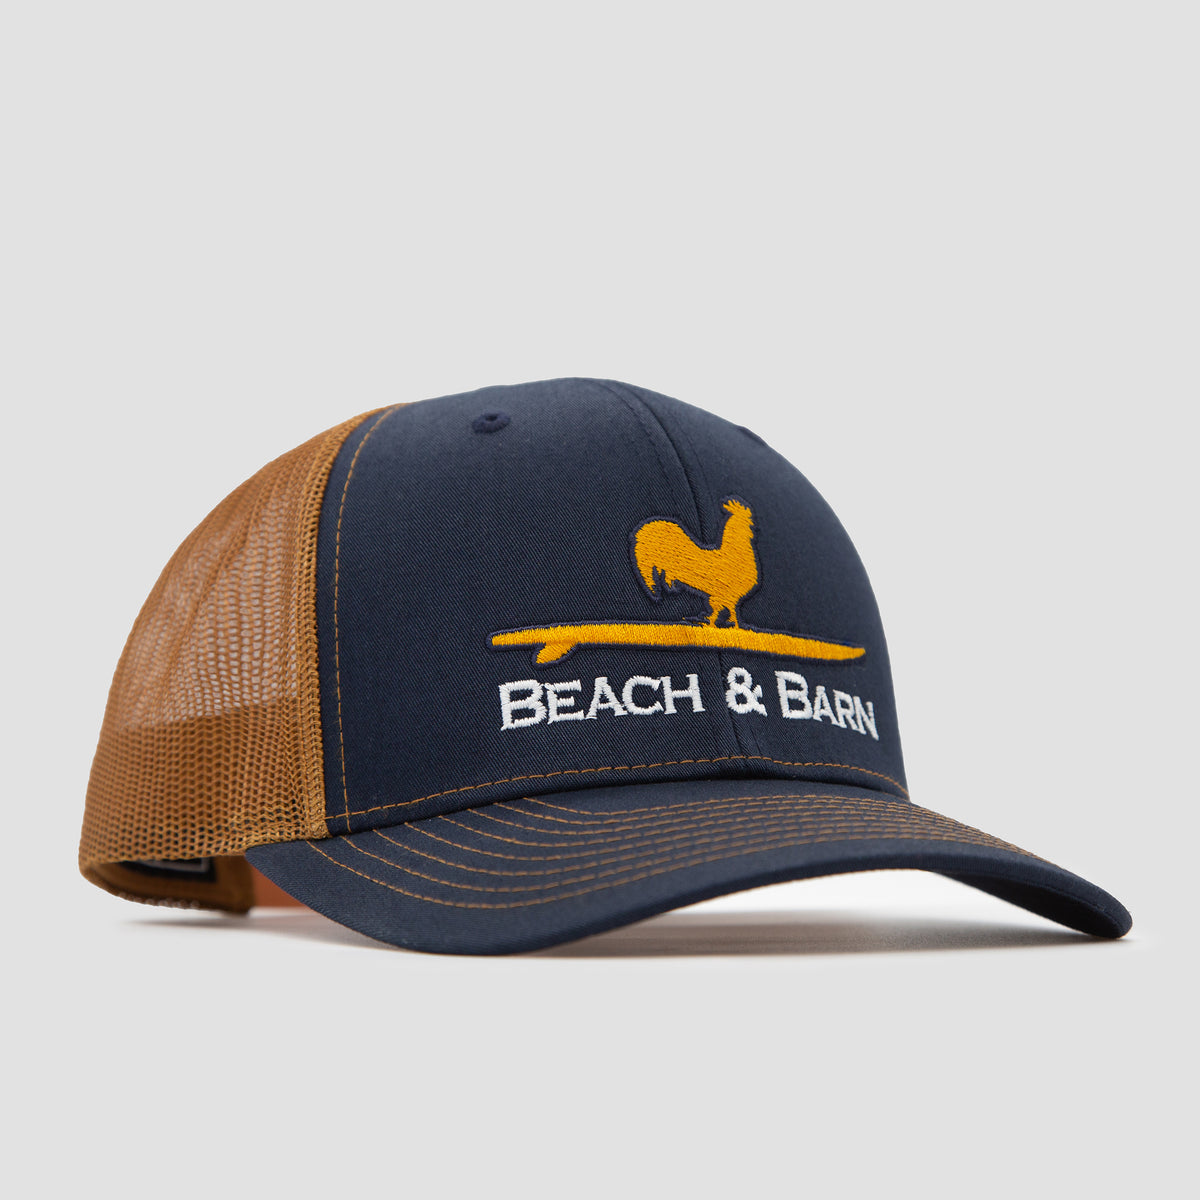 Surfing Rooster Snapback Hat